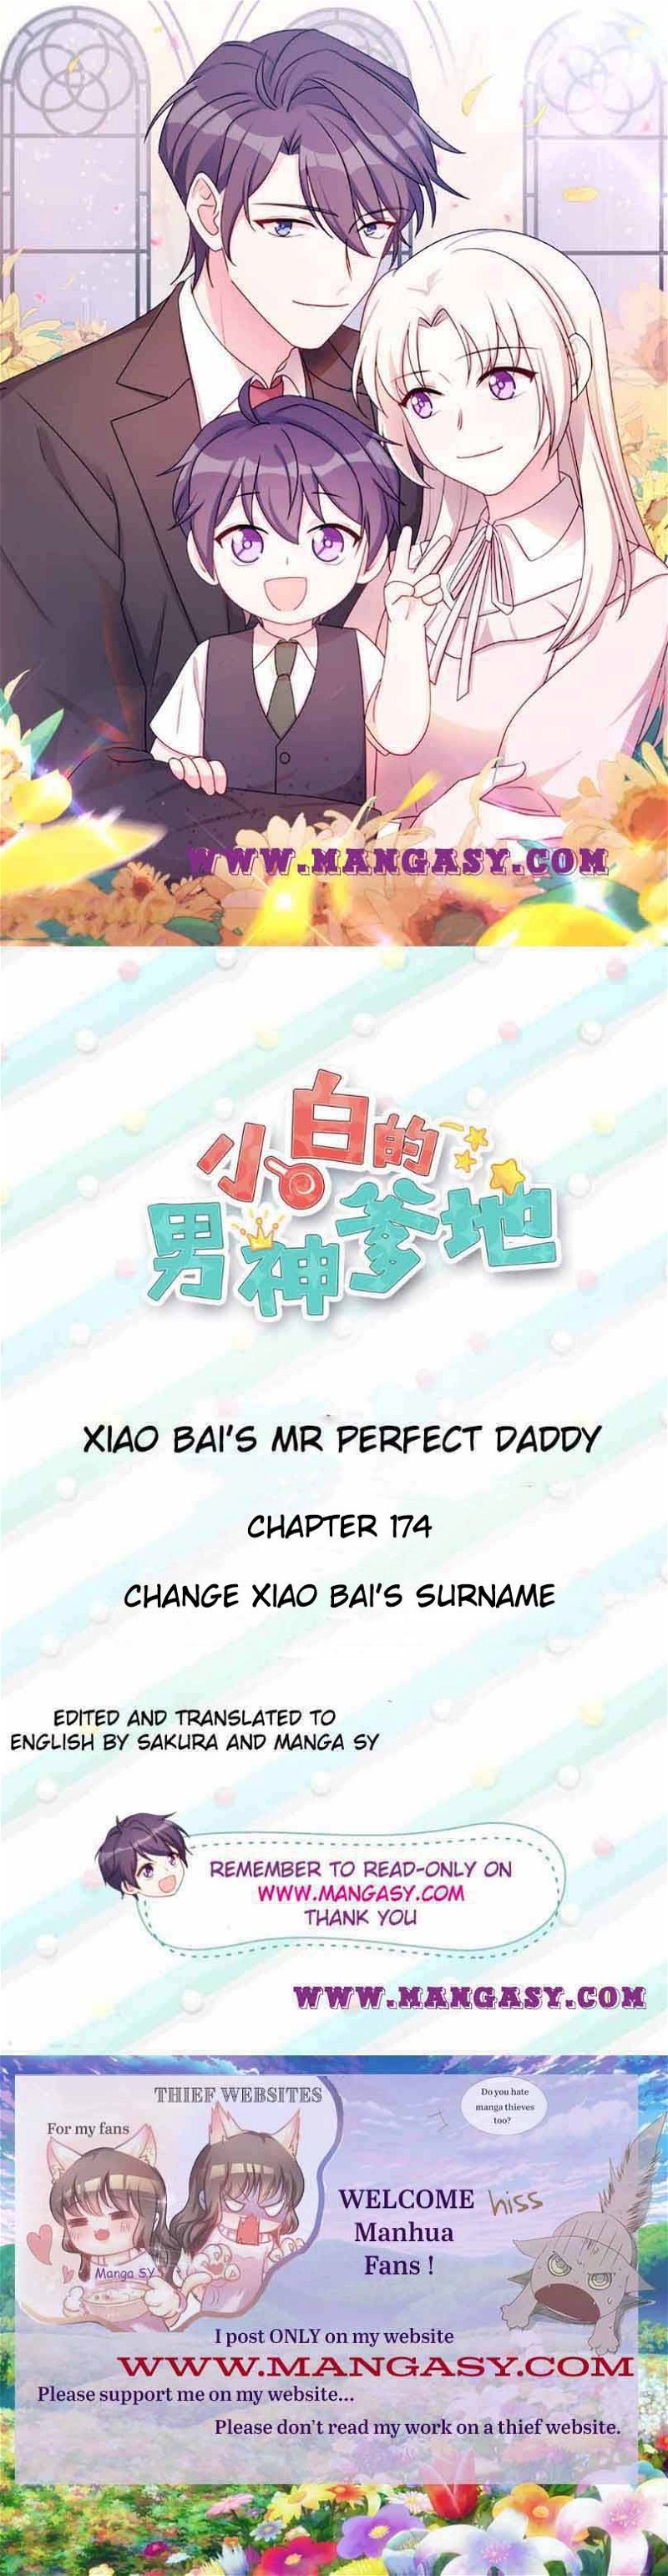 Xiao Bai’s father is a wonderful person Chapter 174 - Page 0